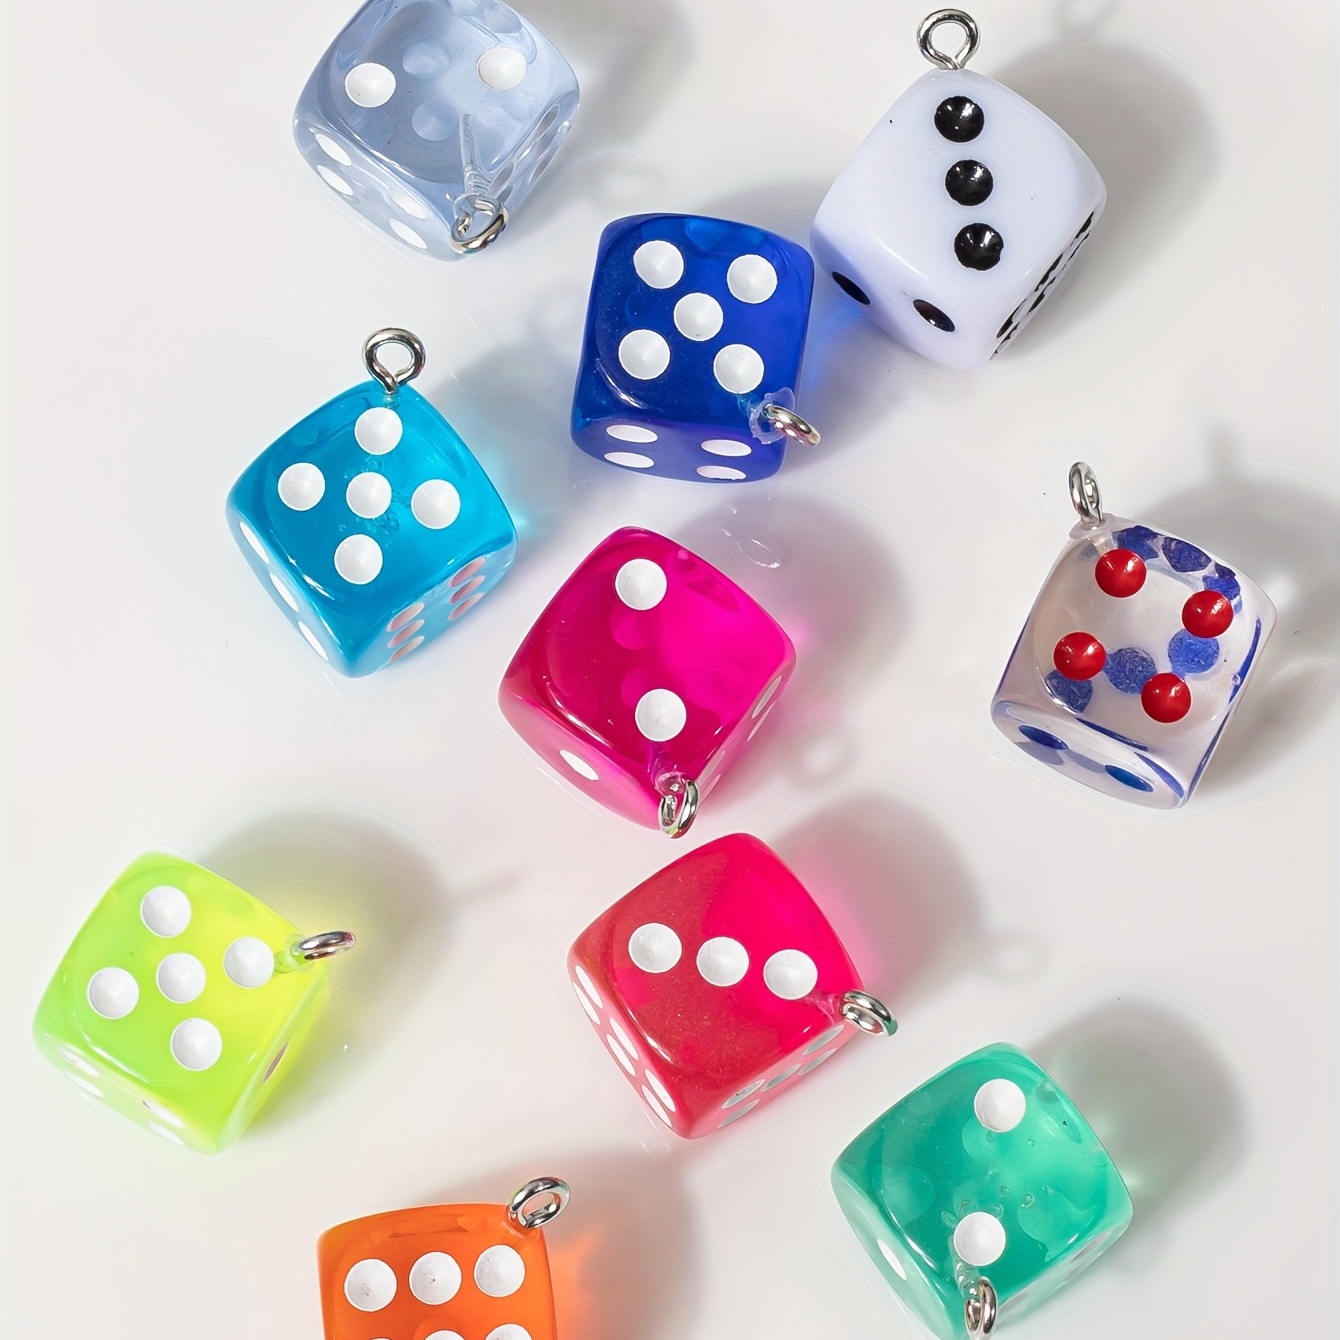 

10pcs/pack Multicolor Colorful Dice Cube Charms Diy Pendant Can Be Used As Necklace And More Jewelry Making Accessories Party Supplies